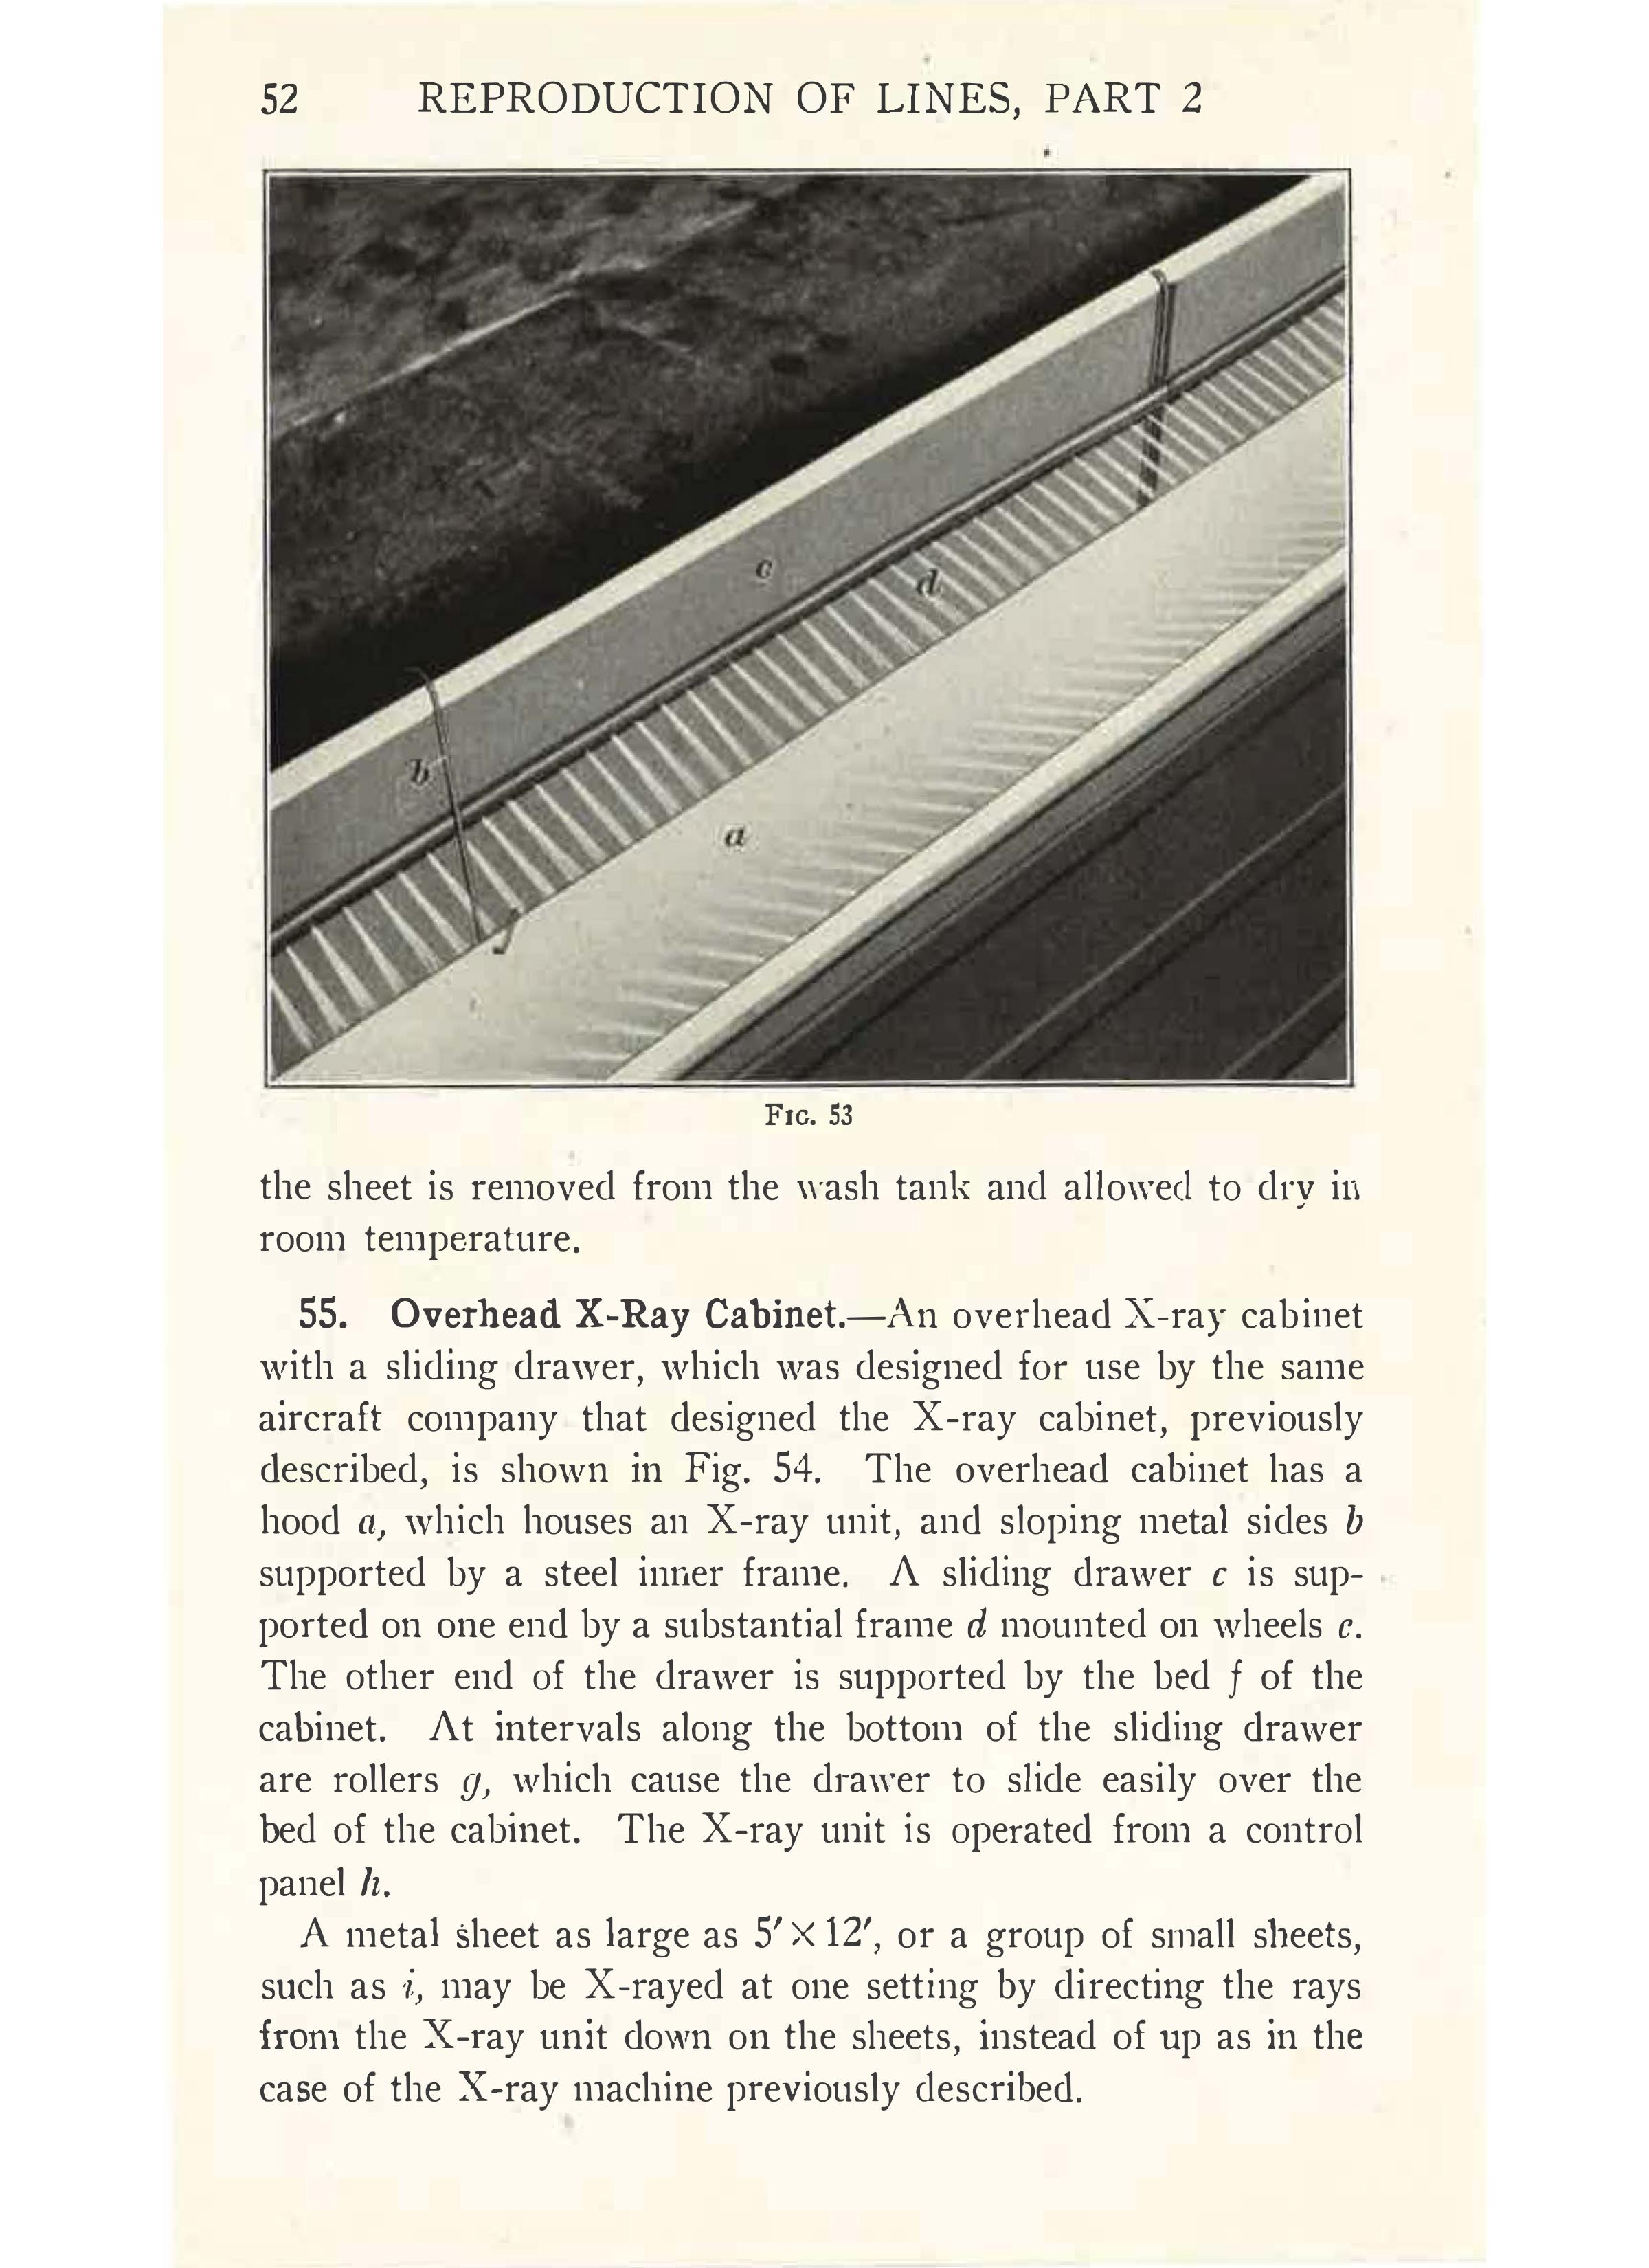 Sample page 54 from AirCorps Library document: Templets and Layout - Reproduction of Lines Part 2 - Bureau of Aeronautics